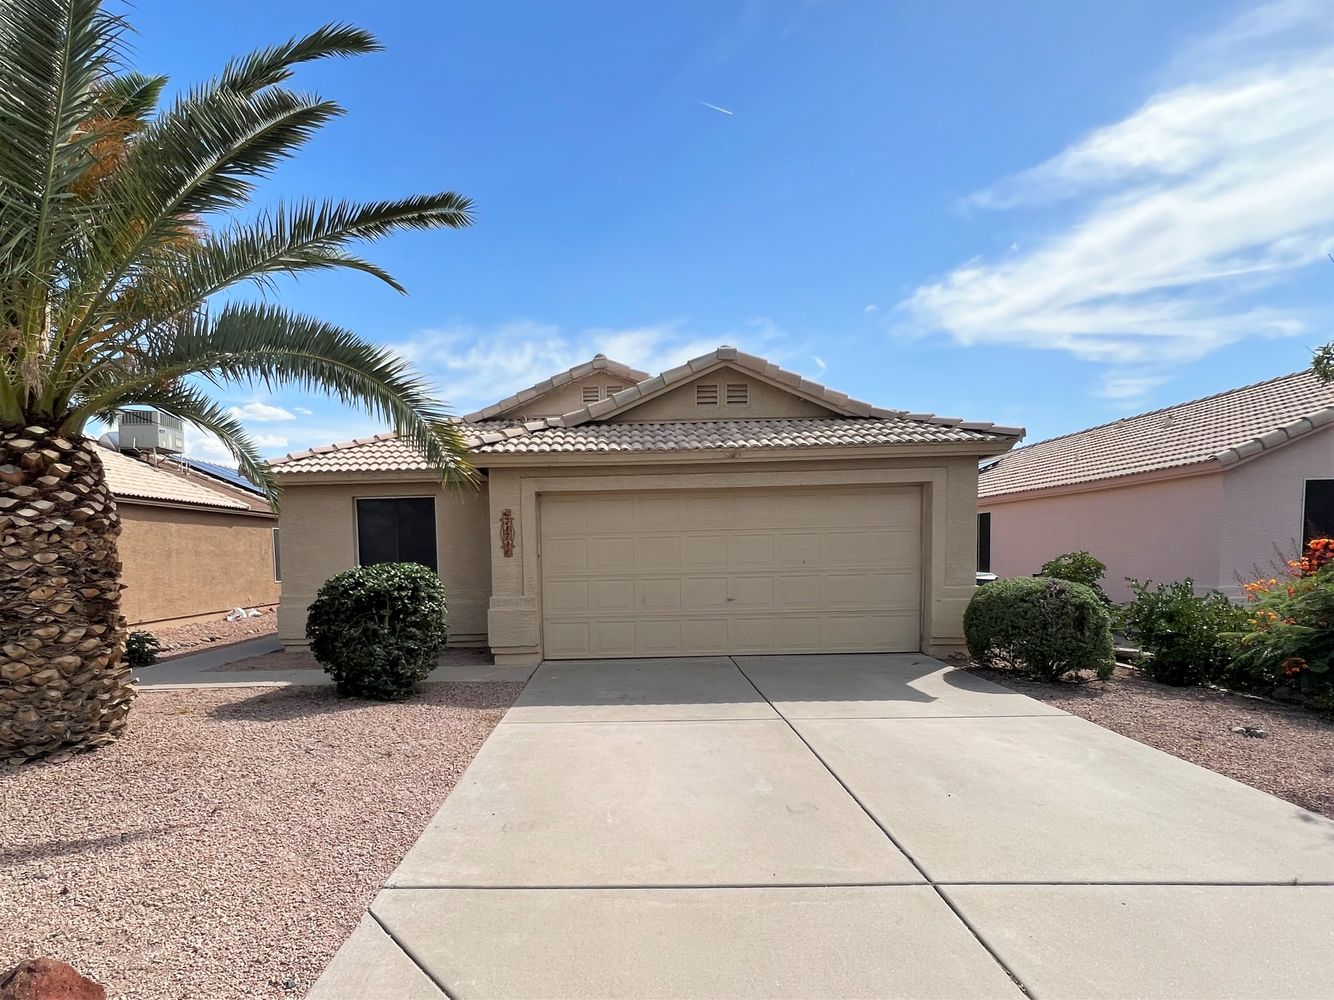 BEAUTIFUL HOME IN APACHE JUNCTION AVE, READY TO MOVE IN 